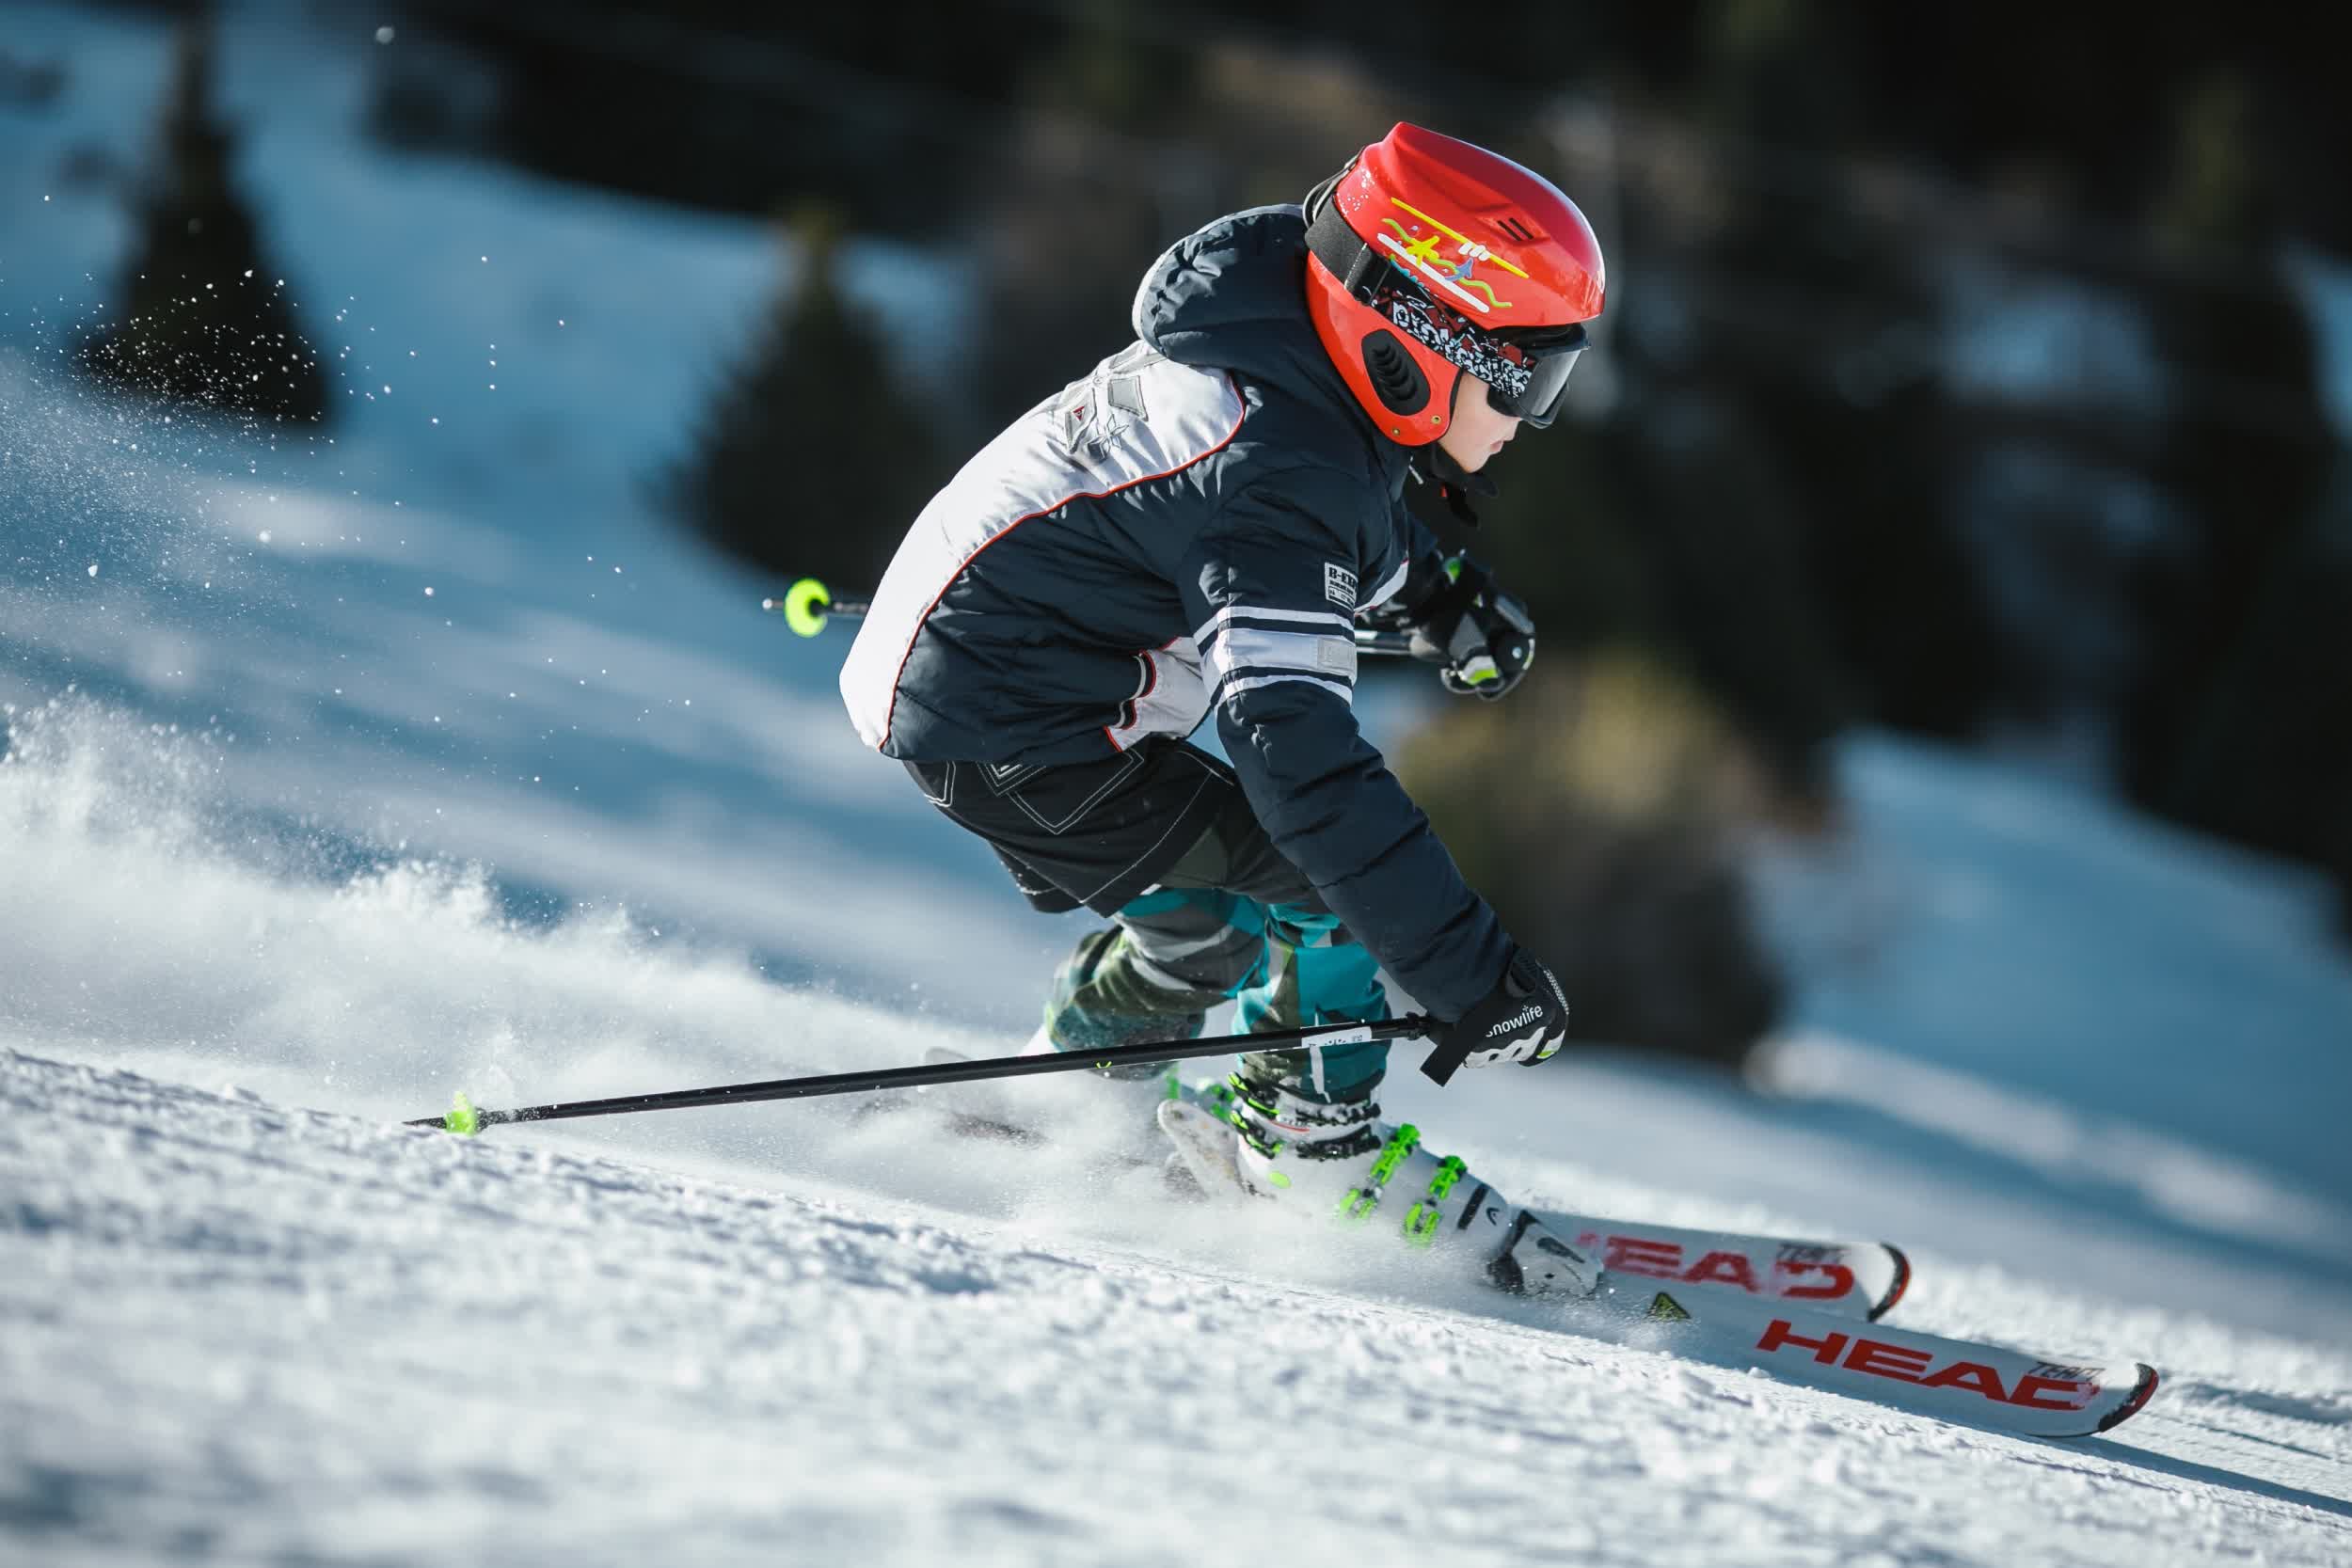 Apple's crash detection continues to trigger false positives, this time on the ski slopes